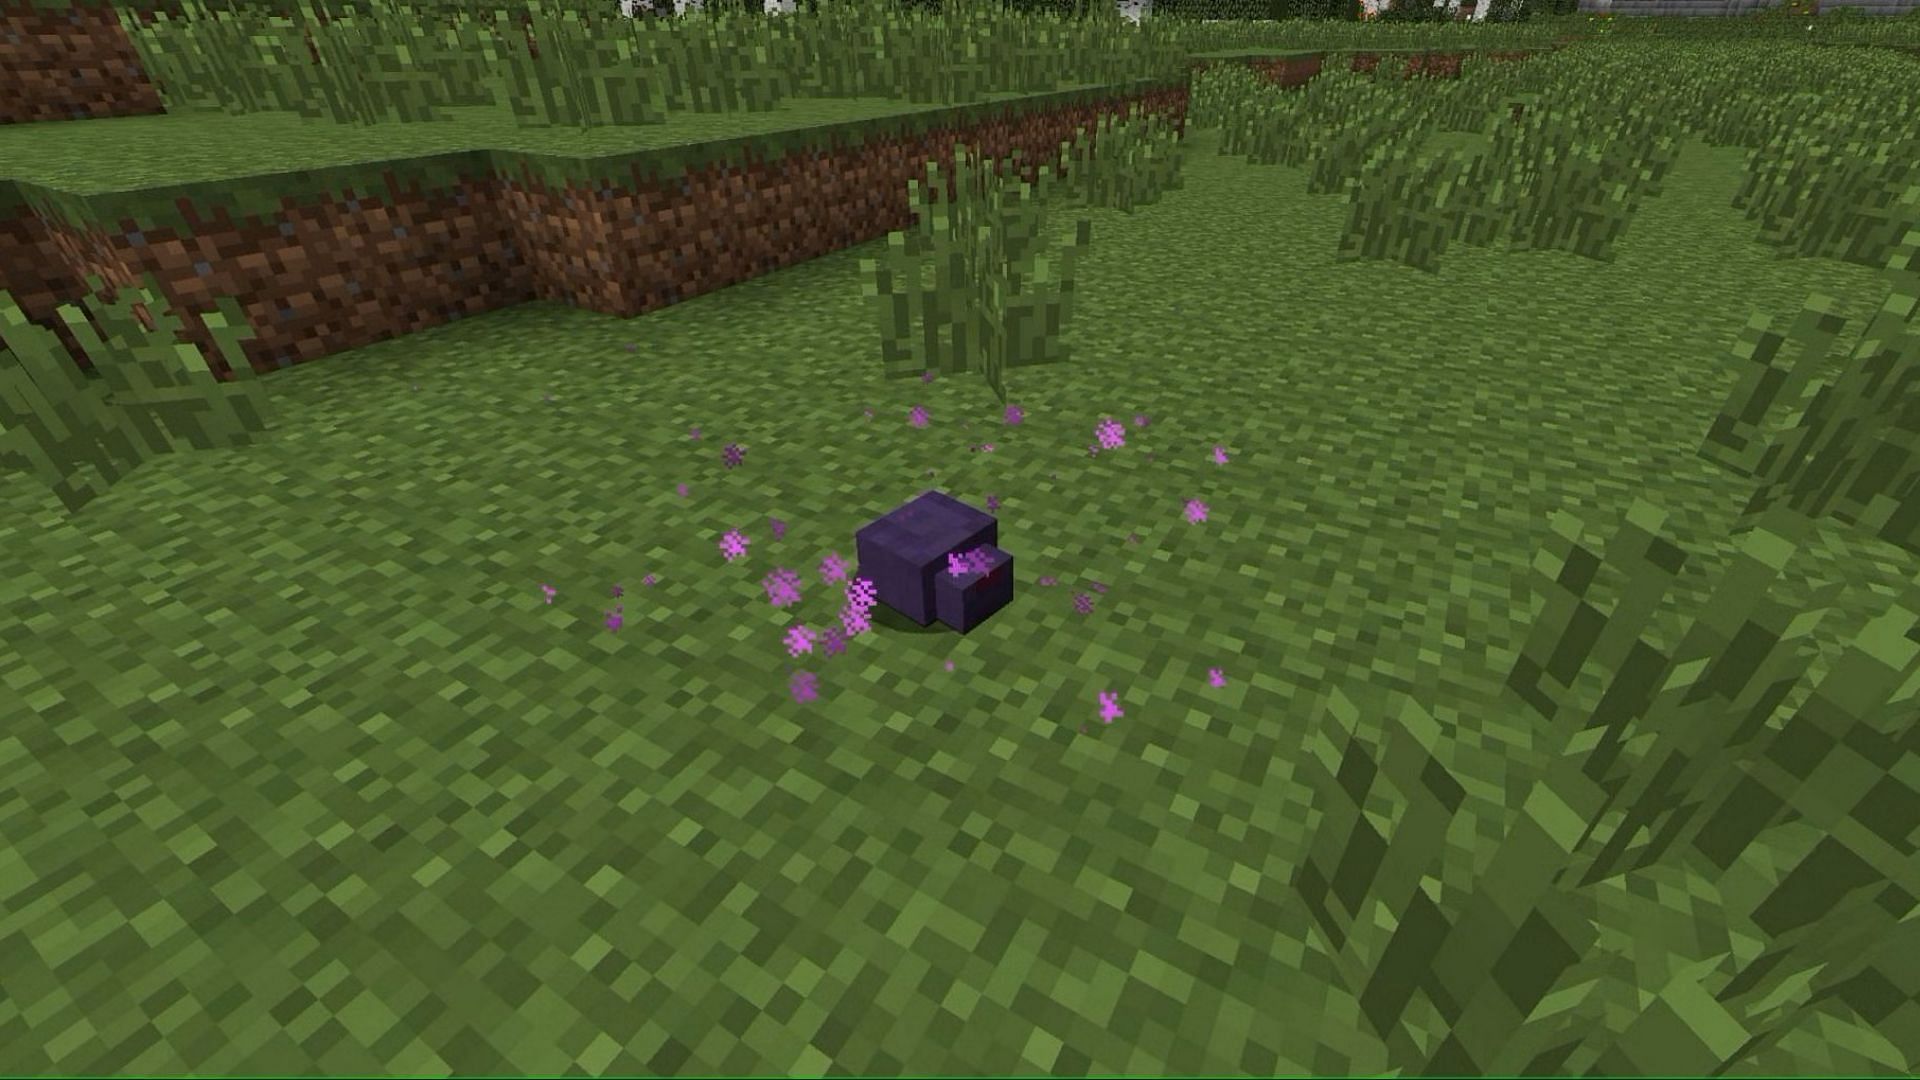 Endermites rarely spawn and are pretty annoying to deal with in Minecraft (Image via Mojang)